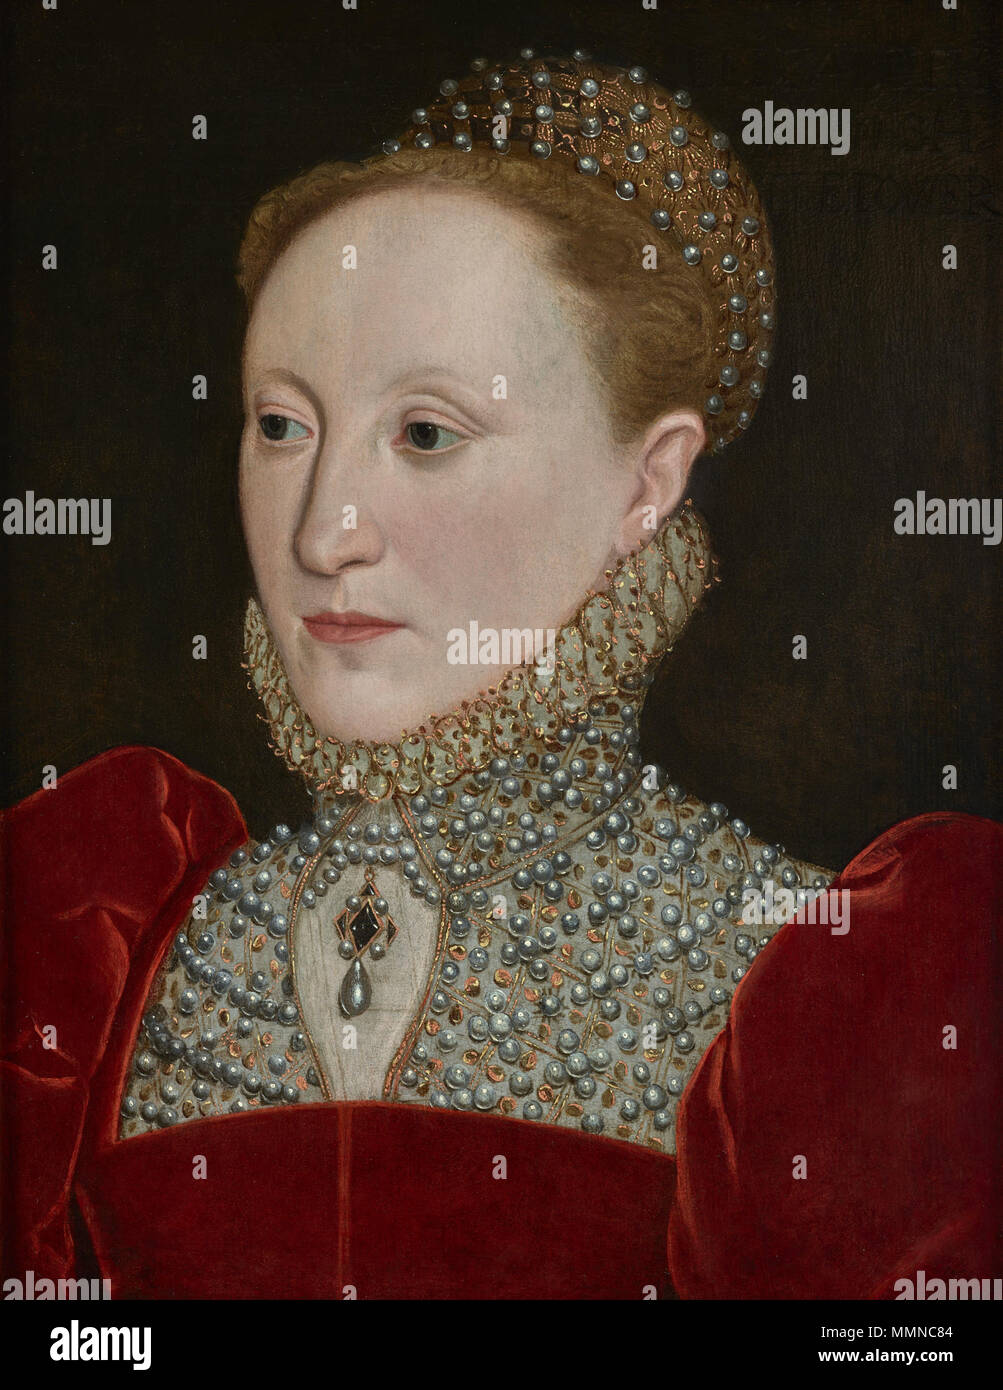 . Depicted person: Elizabeth I of England English: Elizabeth I of England in a red velvet dress with a pearl-studded partlet and a ruff trimmed with gold spangles, ca. 1560s.  . between circa 1560 and circa 1569. English School, circa 1560s, Elizabeth I of England Stock Photo